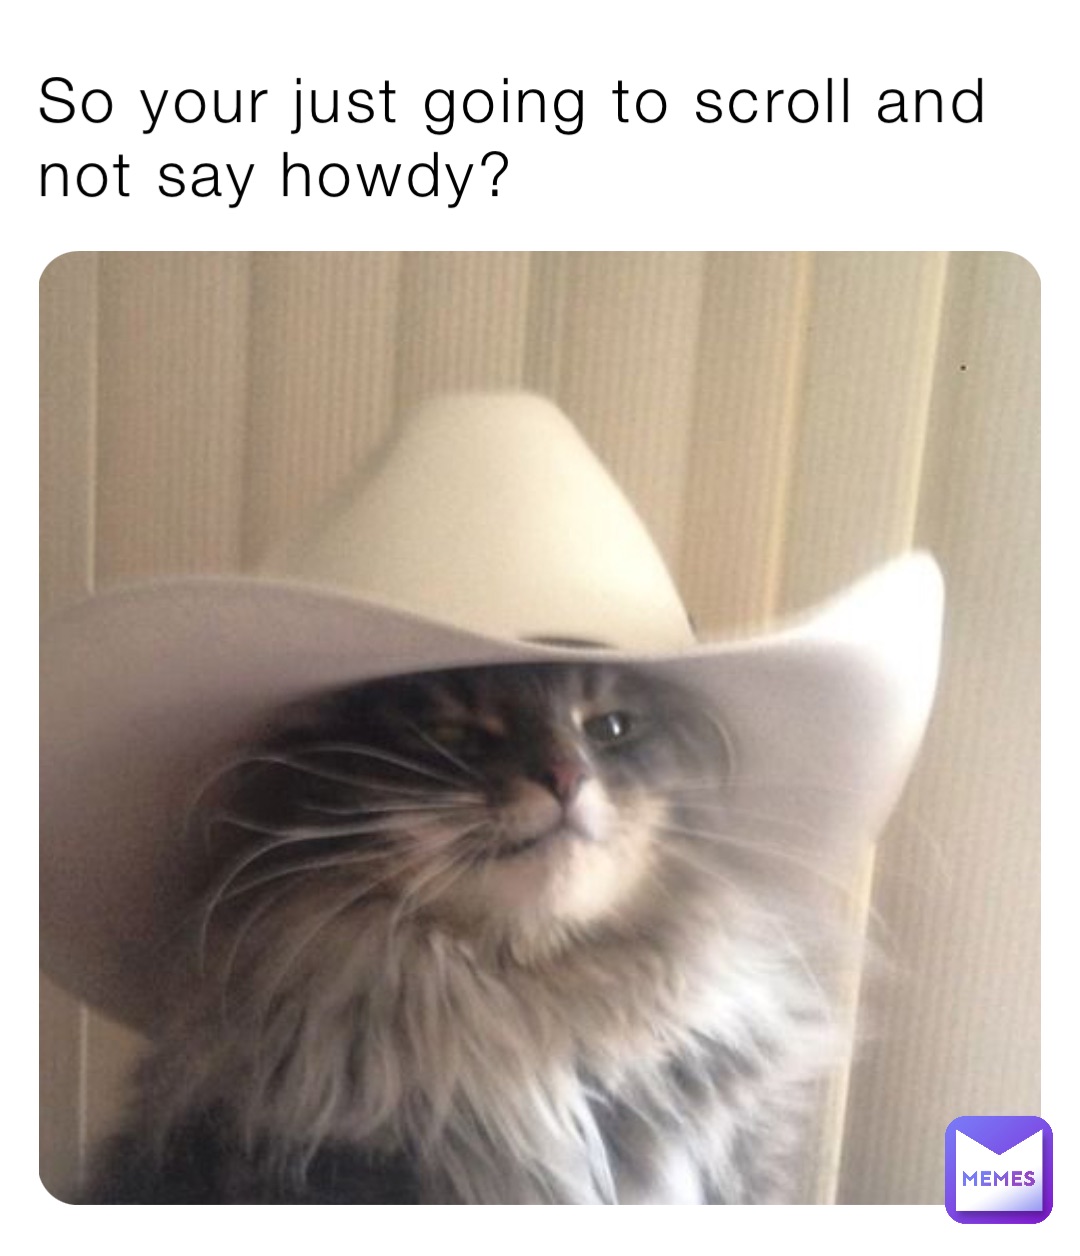 So your just going to scroll and not say howdy?